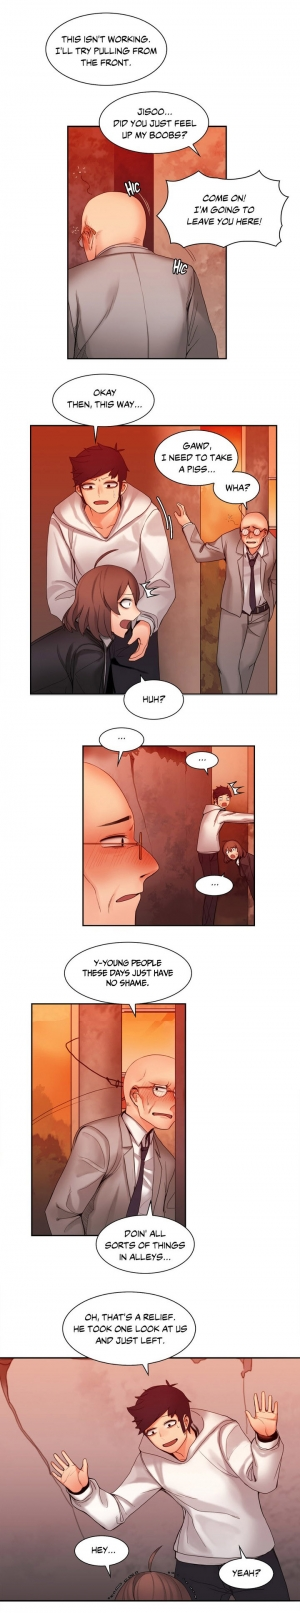 [Gaehoju, Gunnermul] The Girl That Got Stuck in the Wall Ch.11/11 [COMPLETED] [English] [Hentai Universe] - Page 114